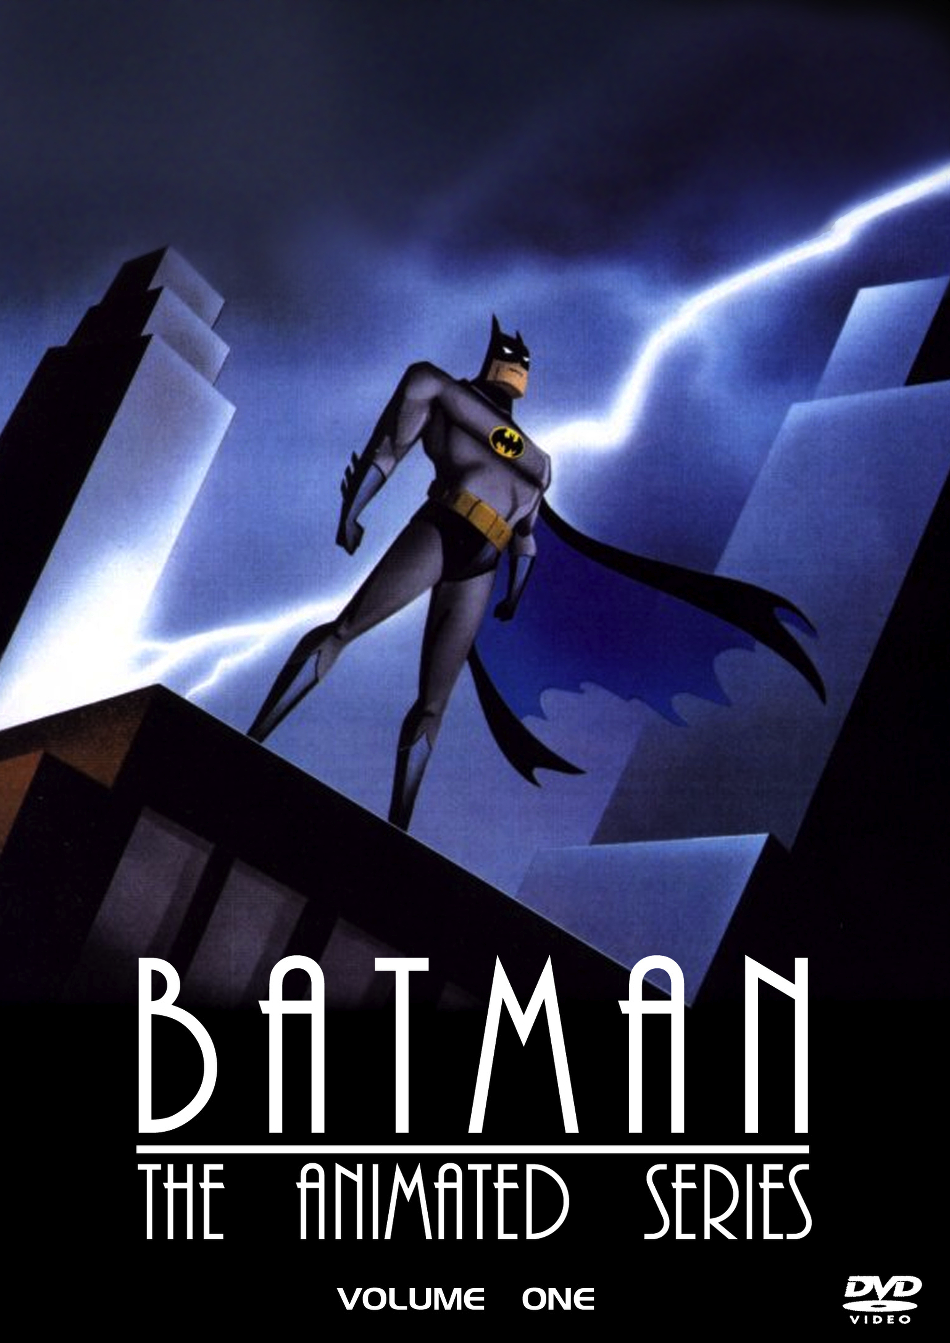 ... animated television series batman the animated series based on the dc